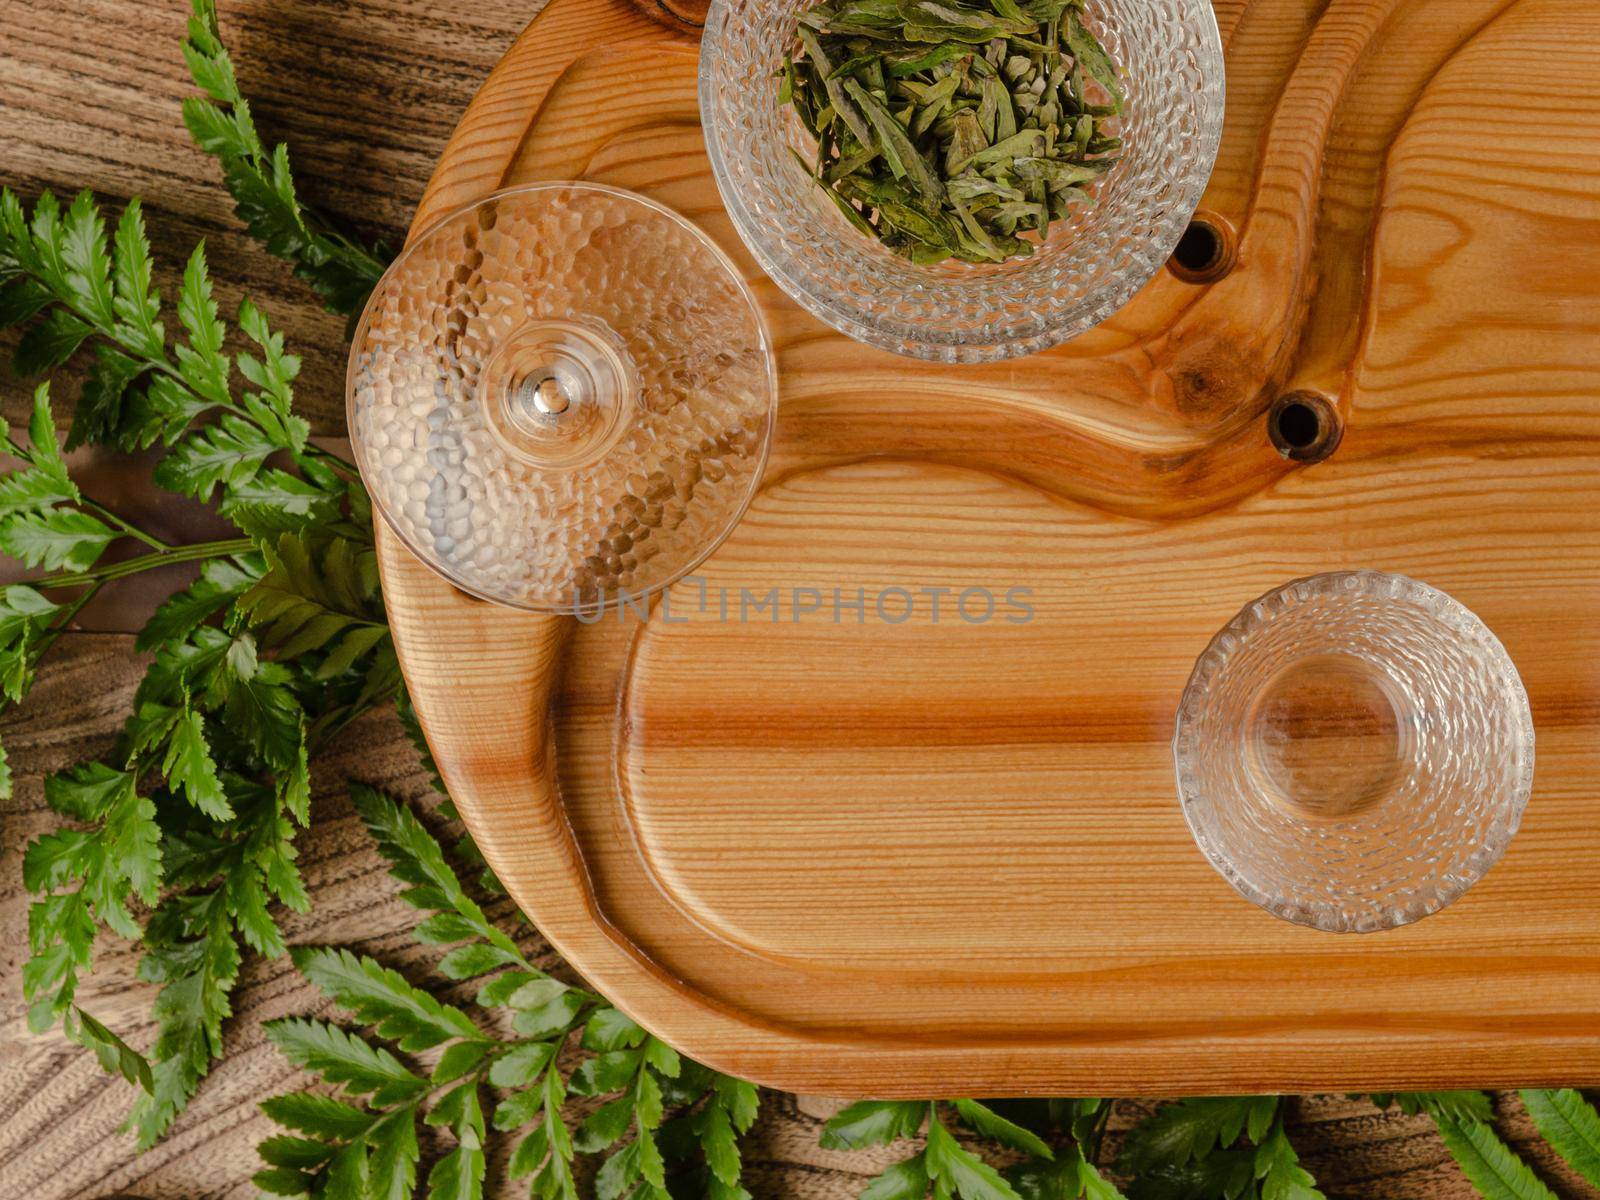 the tea table with instruments teapots cups pancake and tea Shen Puer